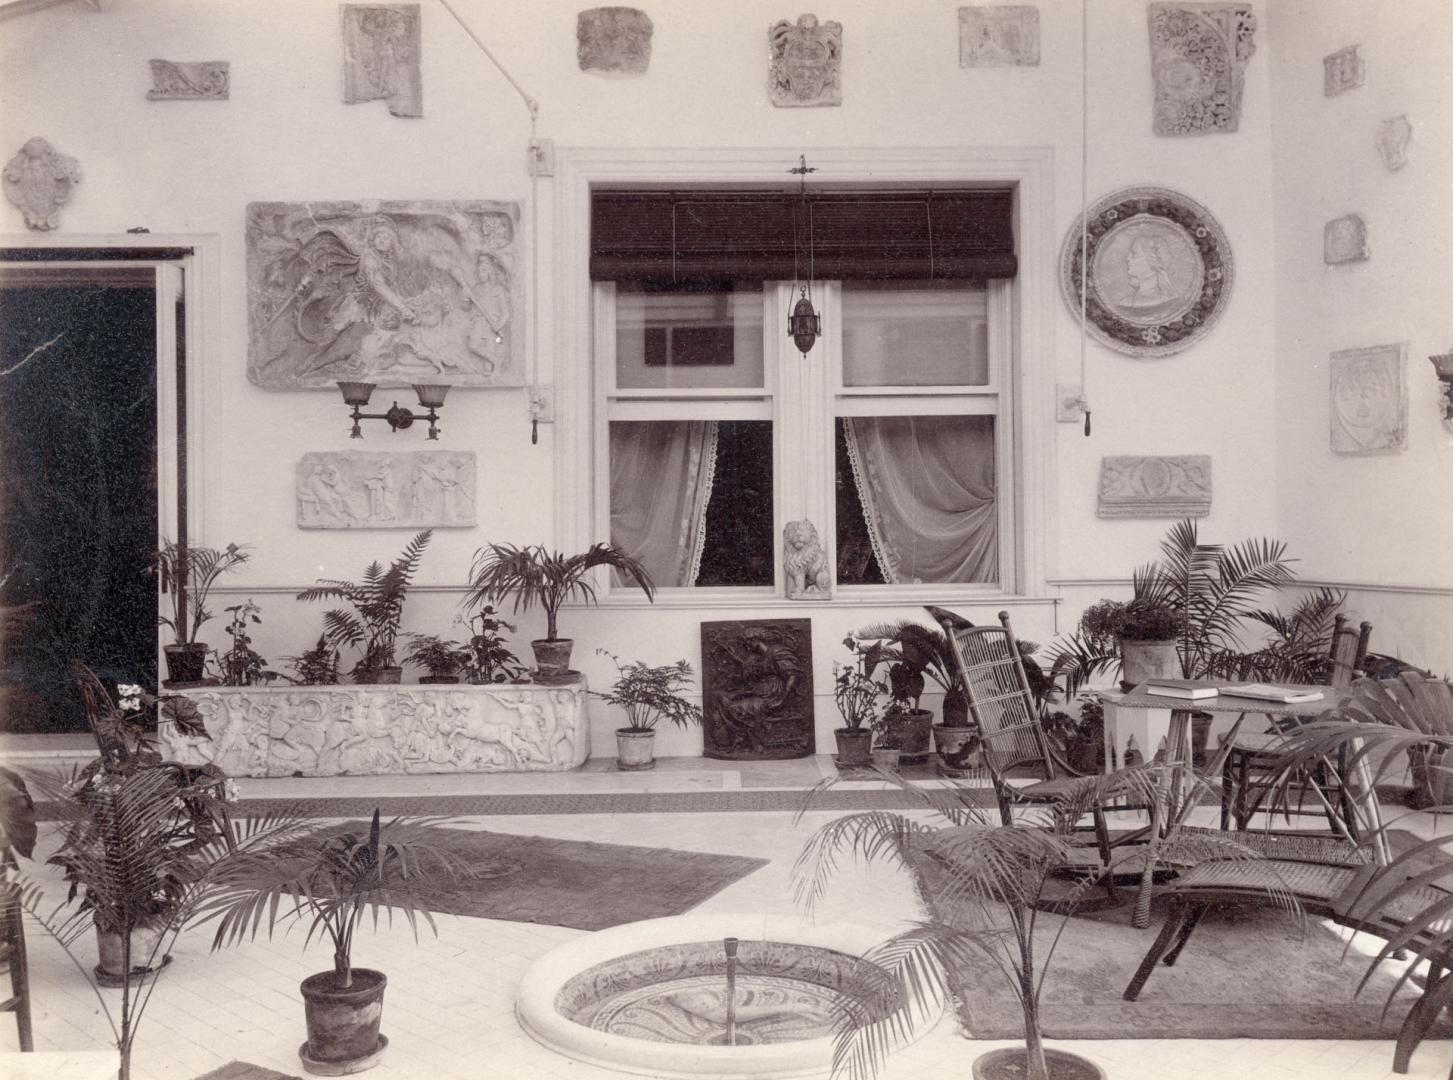 Image shows an interior of the conservatory.